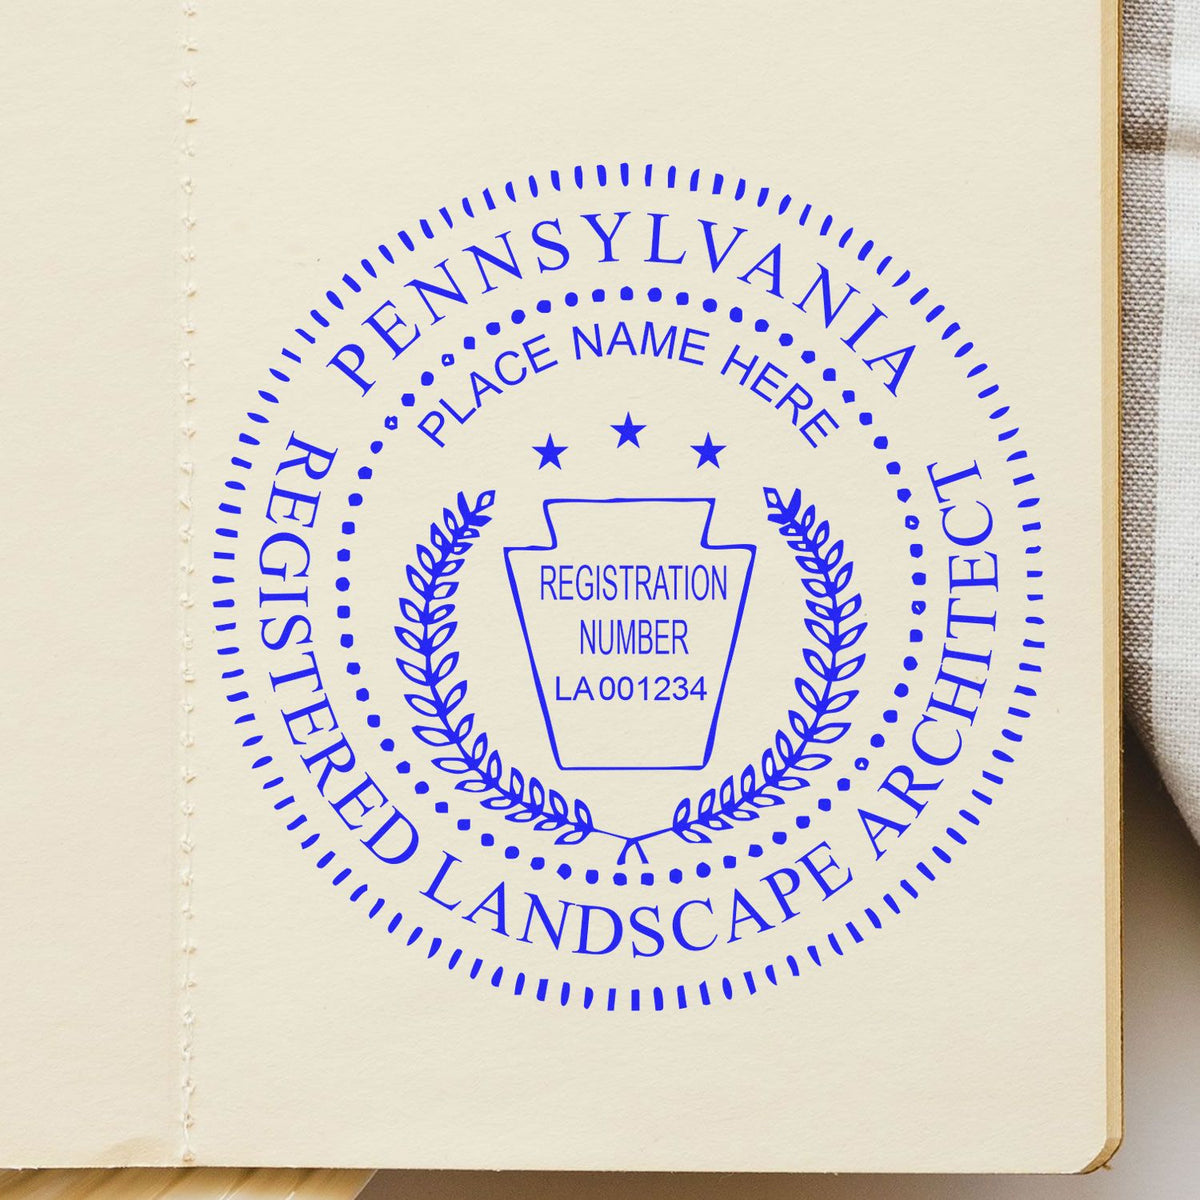 The Slim Pre-Inked Pennsylvania Landscape Architect Seal Stamp stamp impression comes to life with a crisp, detailed photo on paper - showcasing true professional quality.